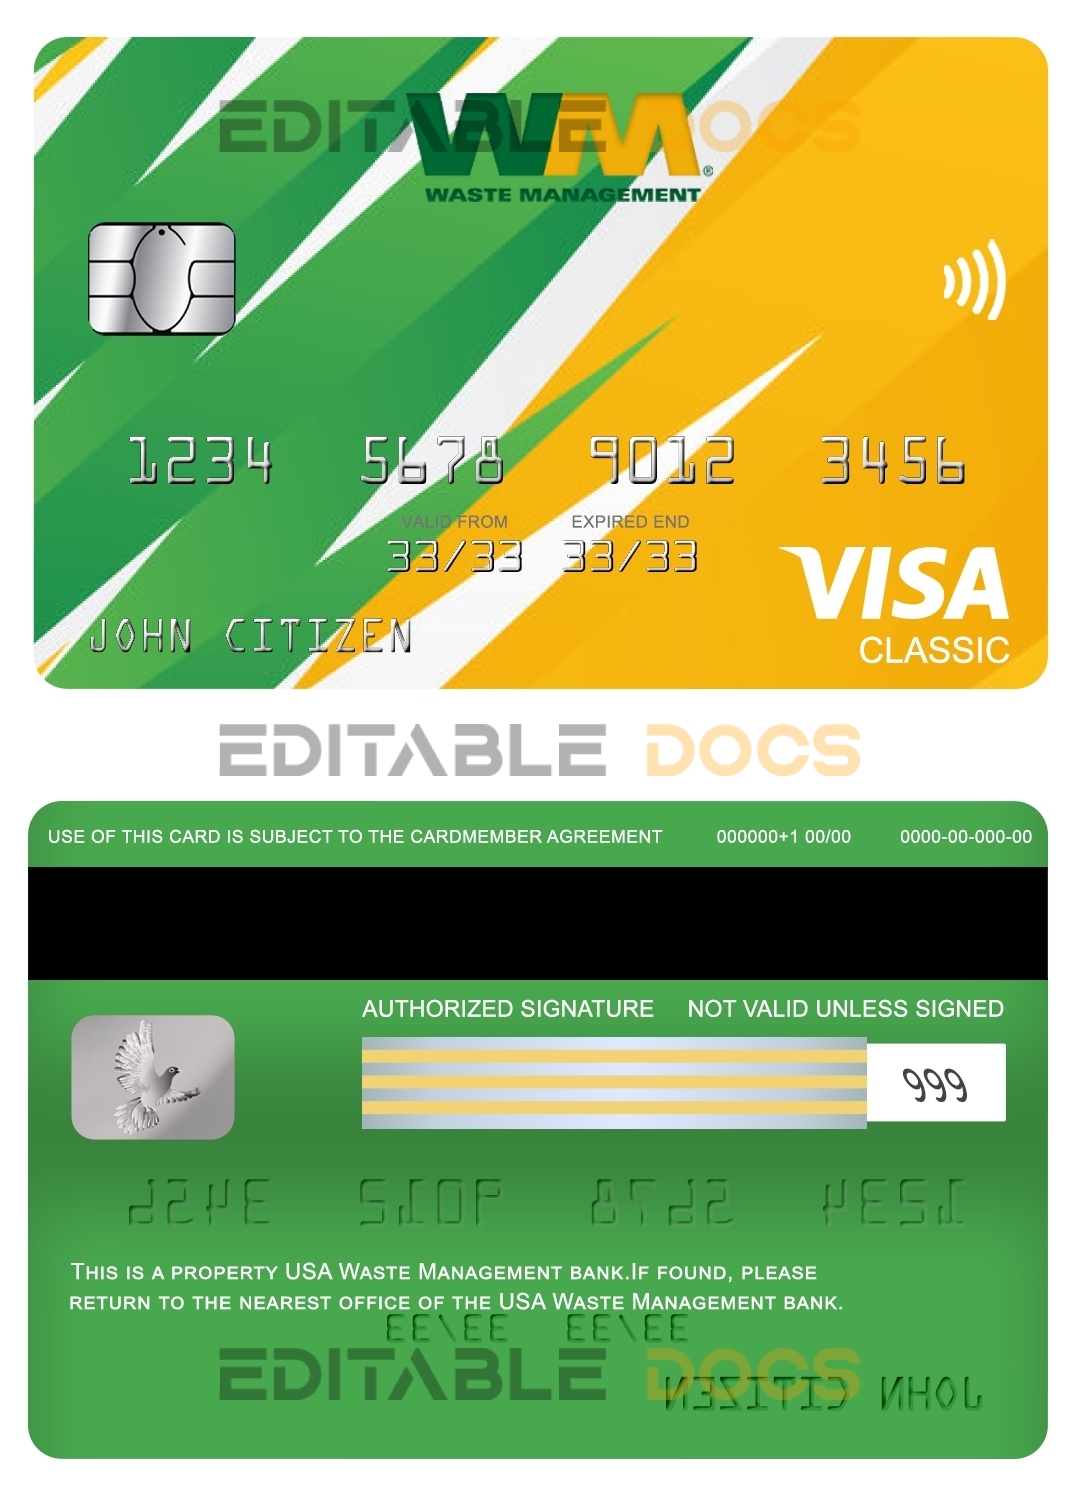 Fillable USA Waste Management bank visa classic card Templates | Layer-Based PSD